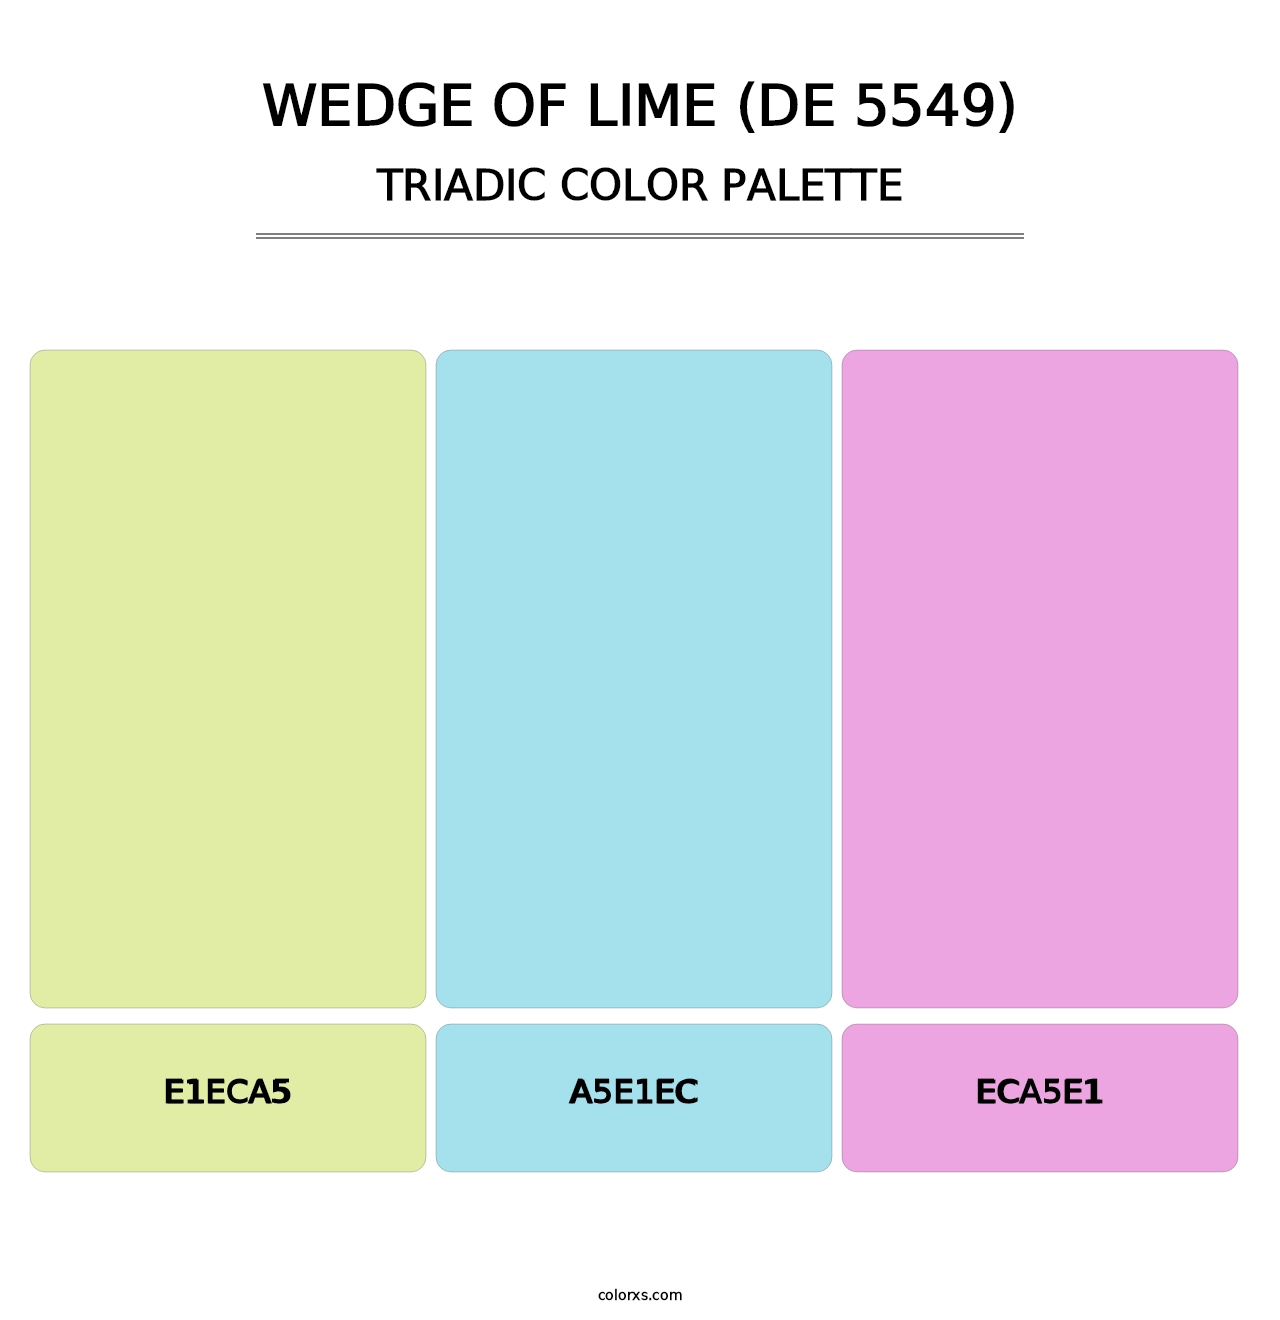 Wedge of Lime (DE 5549) - Triadic Color Palette